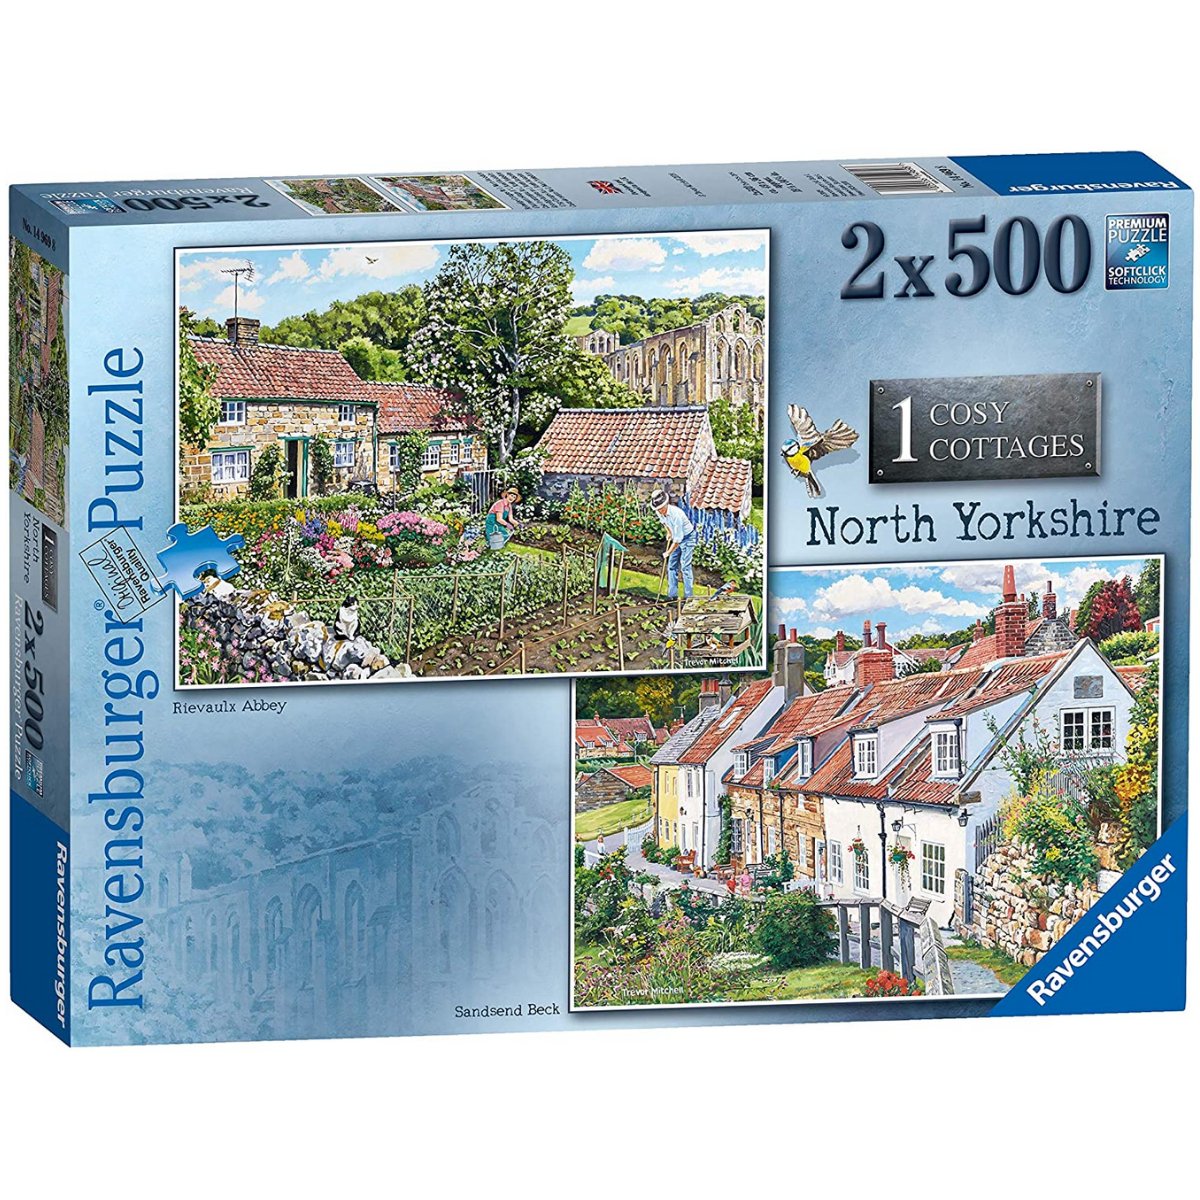 Ravensburger Cosy Cottages - North Yorkshire 2x 500 Piece Jigsaw Puzzle - Phillips Hobbies